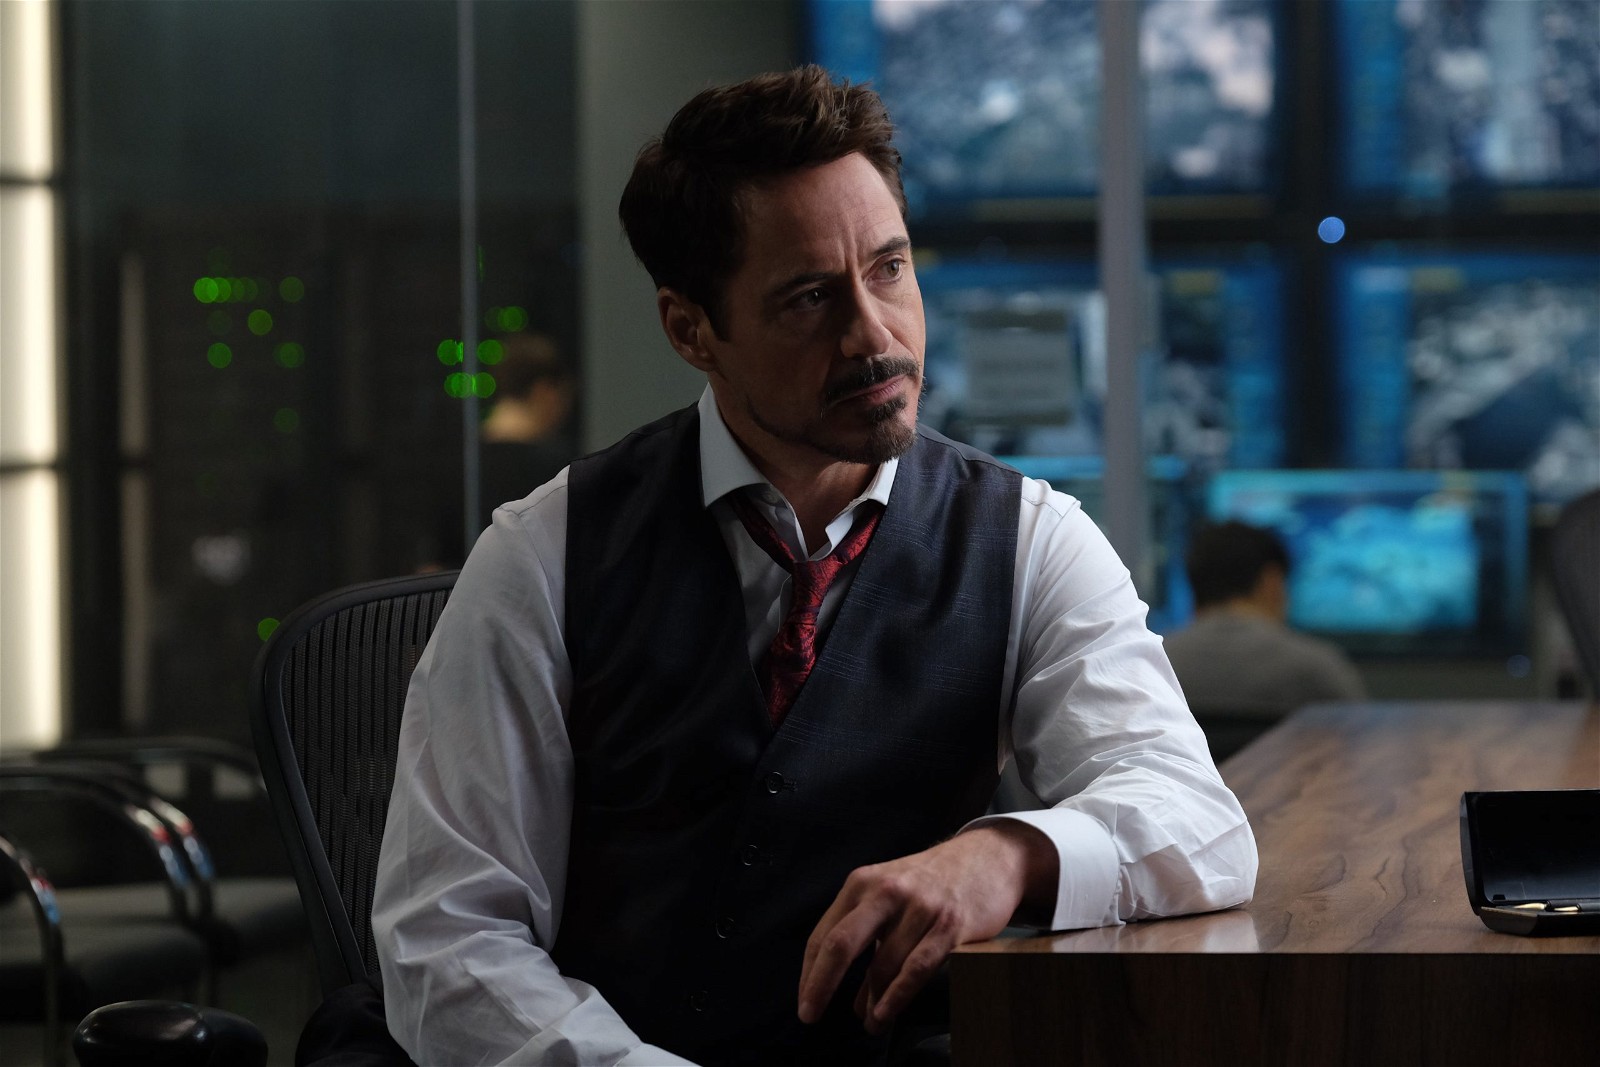 Robert Downey Jr. would've made $70 million if he'd starred in Gravity